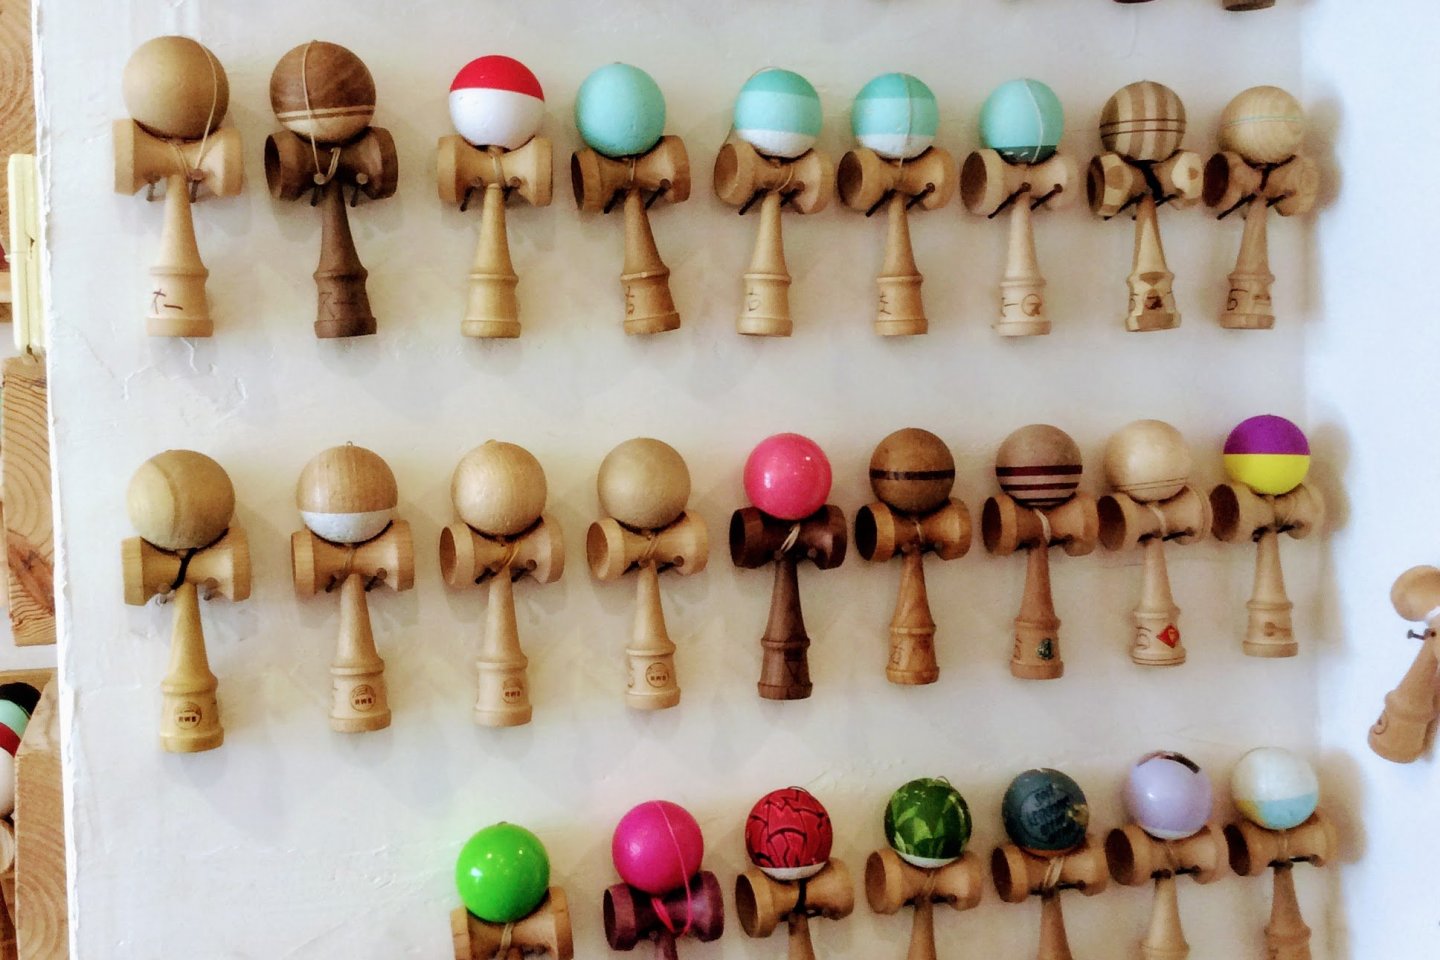 Rows of Su Lab kendama for playing with